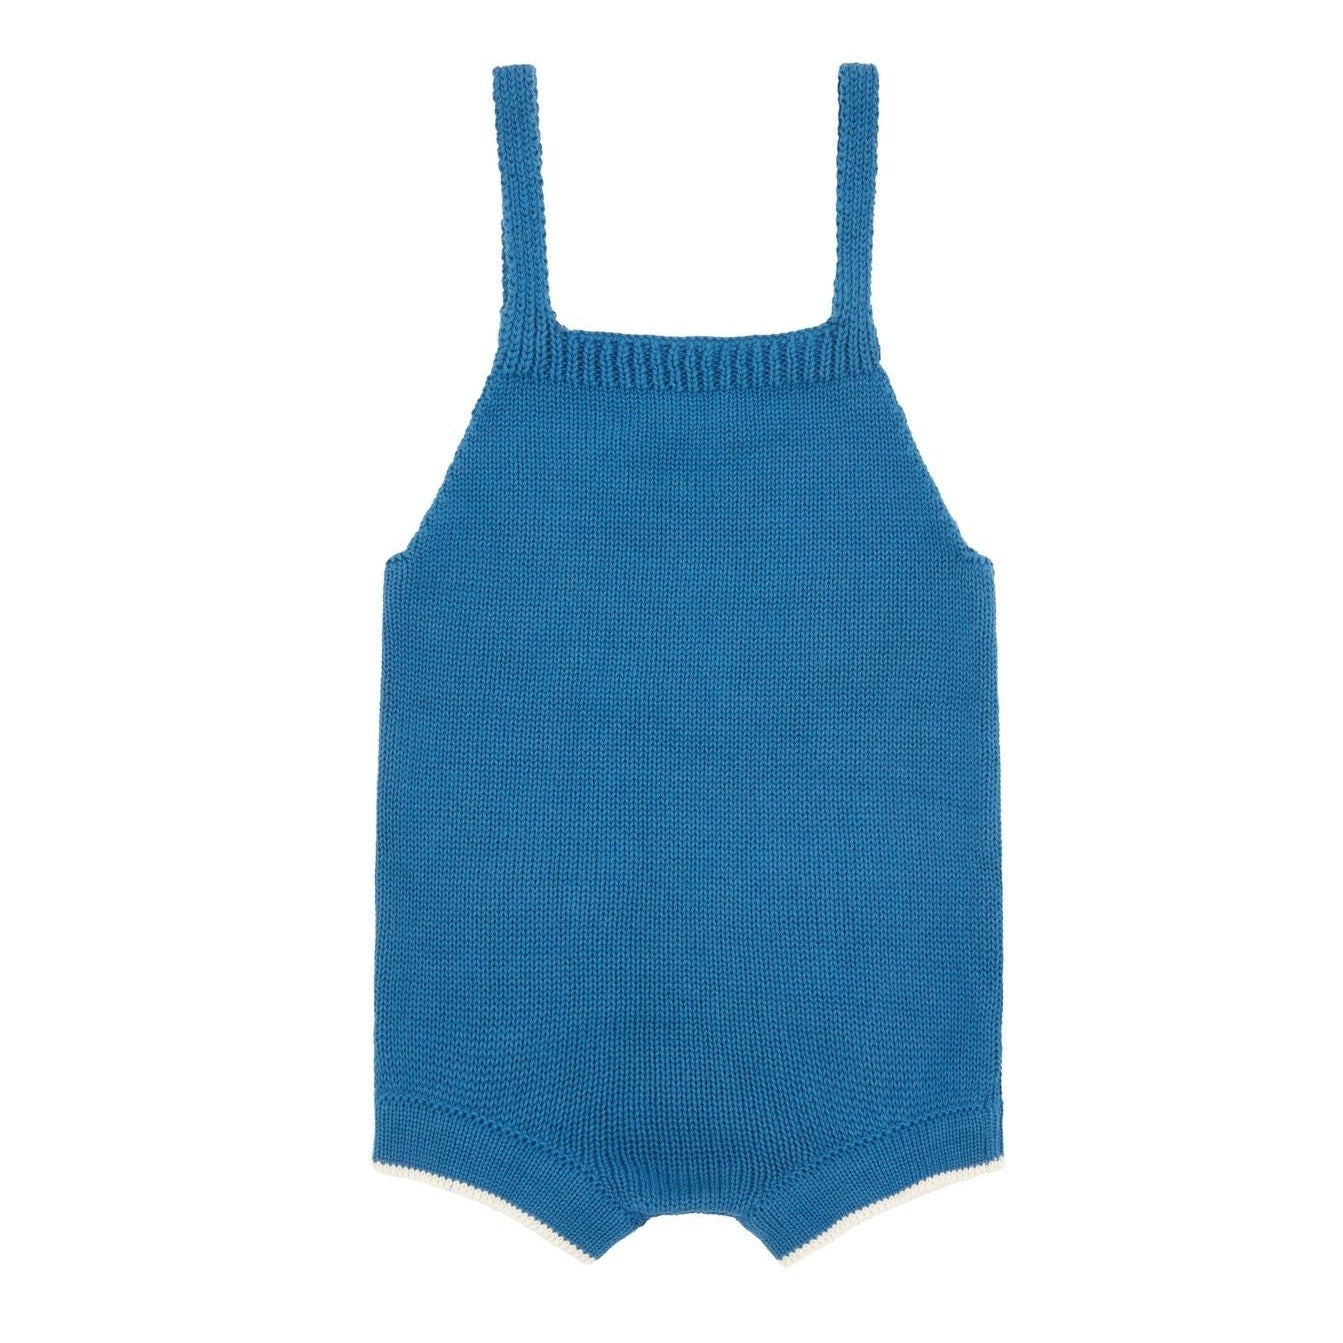 Organic Cotton Nordic Knit Baby Playsuit in Fjord Blue by Vild House of Little